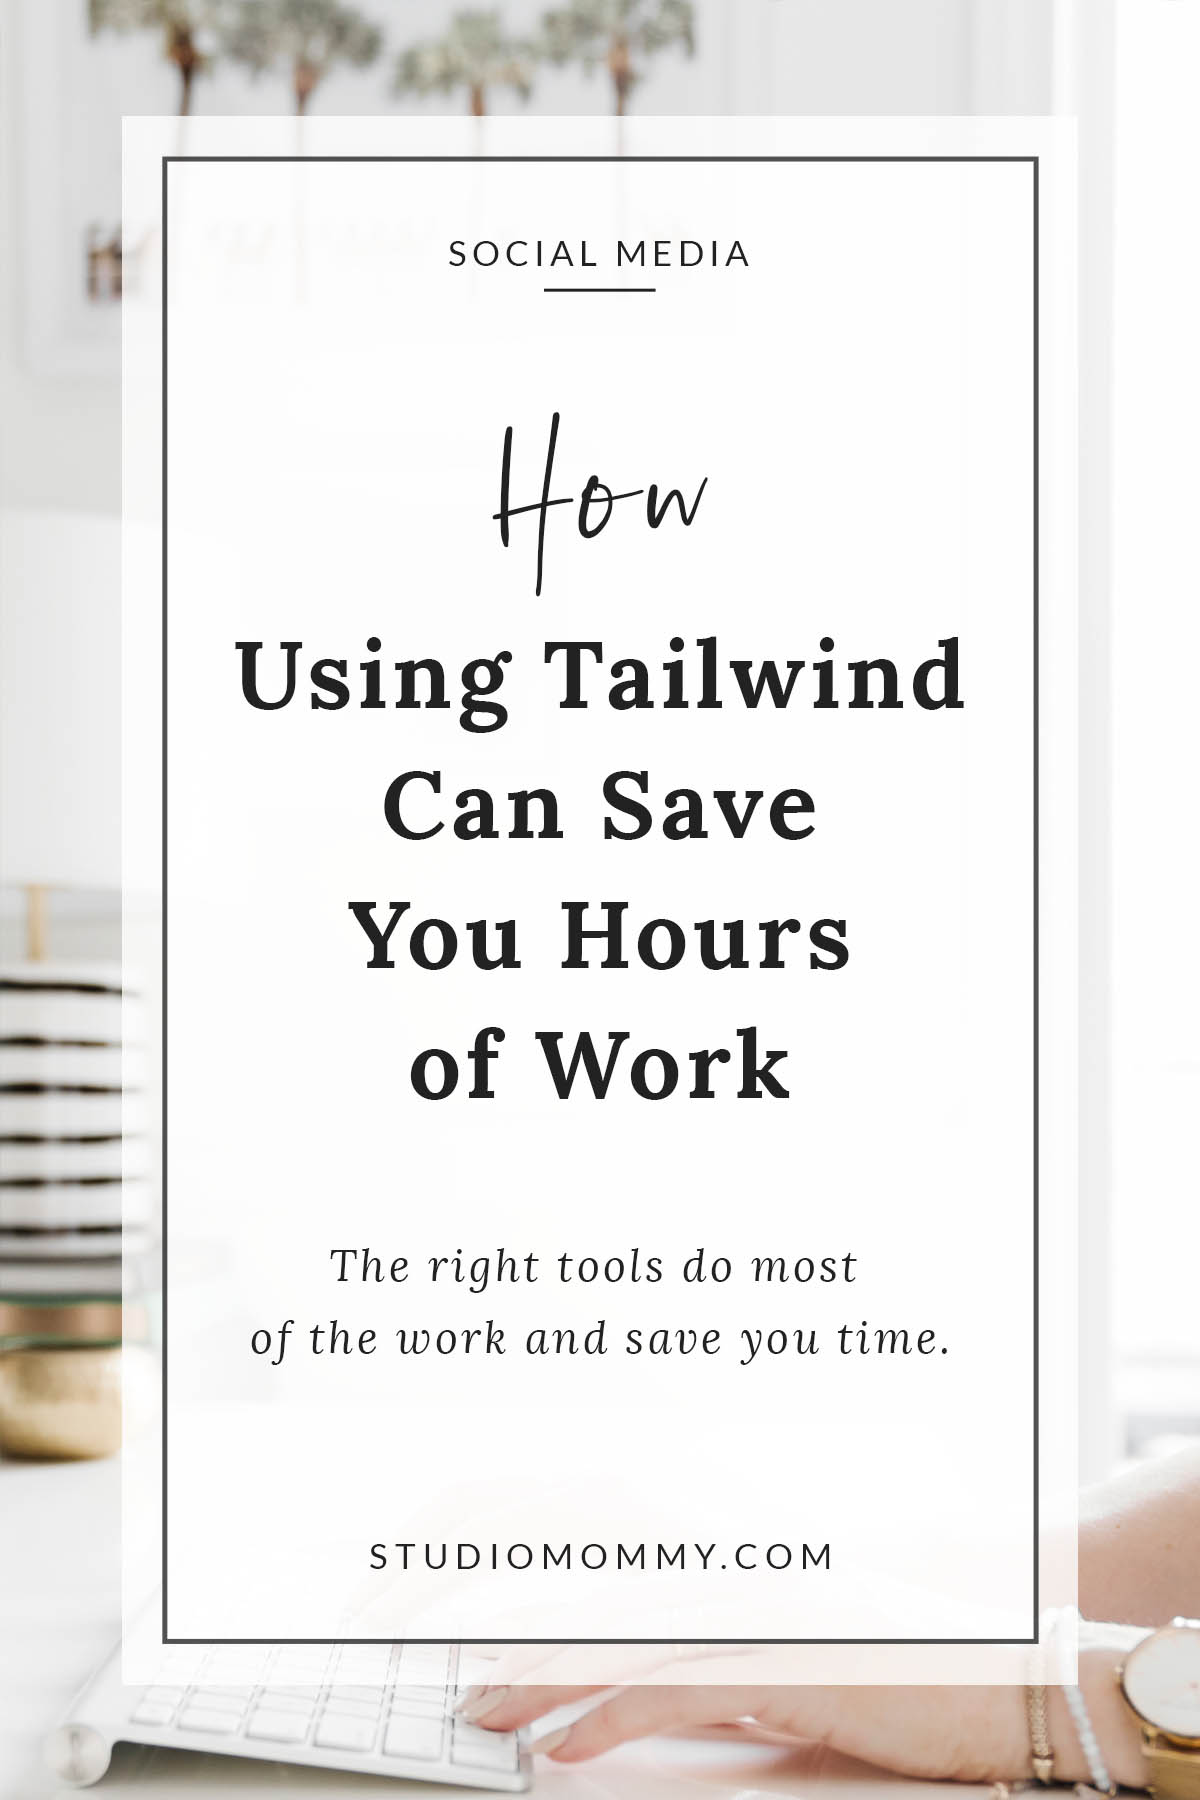 When you’re an online business owner, there are a ton of things to do.You just need the right tools that will do most of the work and save you time. #tailwind #socialmedia #pinterest #instagram